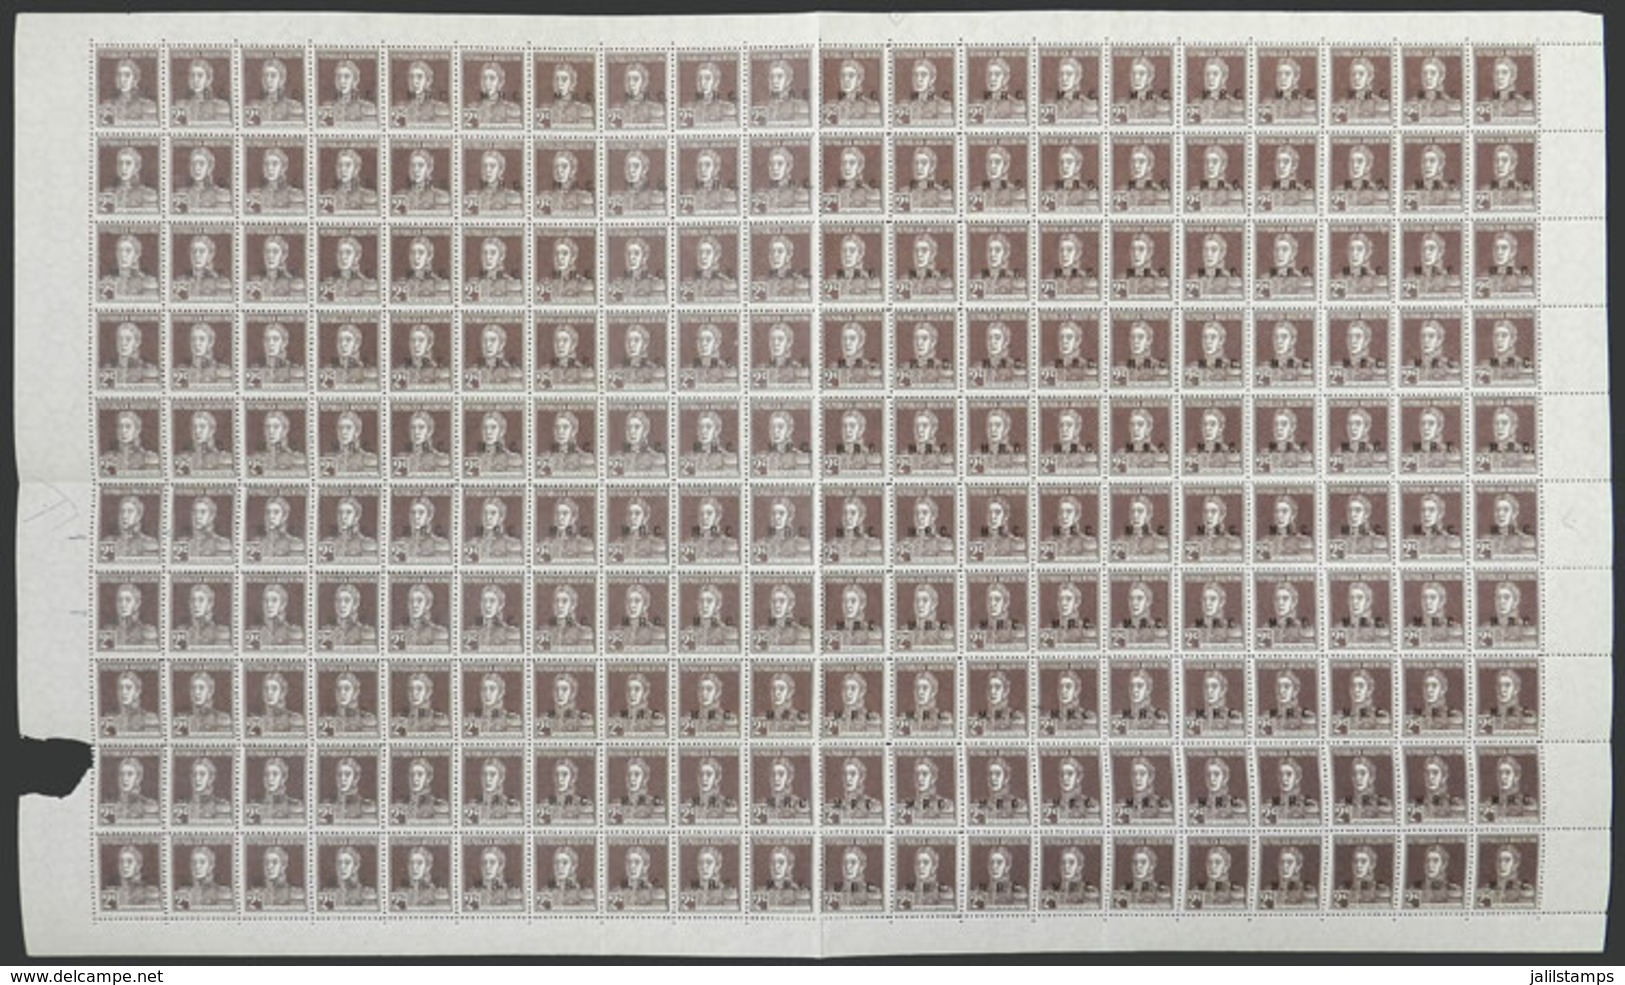 ARGENTINA: GJ.602, 1925 2c. San Martín W/o Period With M.R.C. Overprint, Complete Sheet Of 200 Stamps, Including Several - Officials